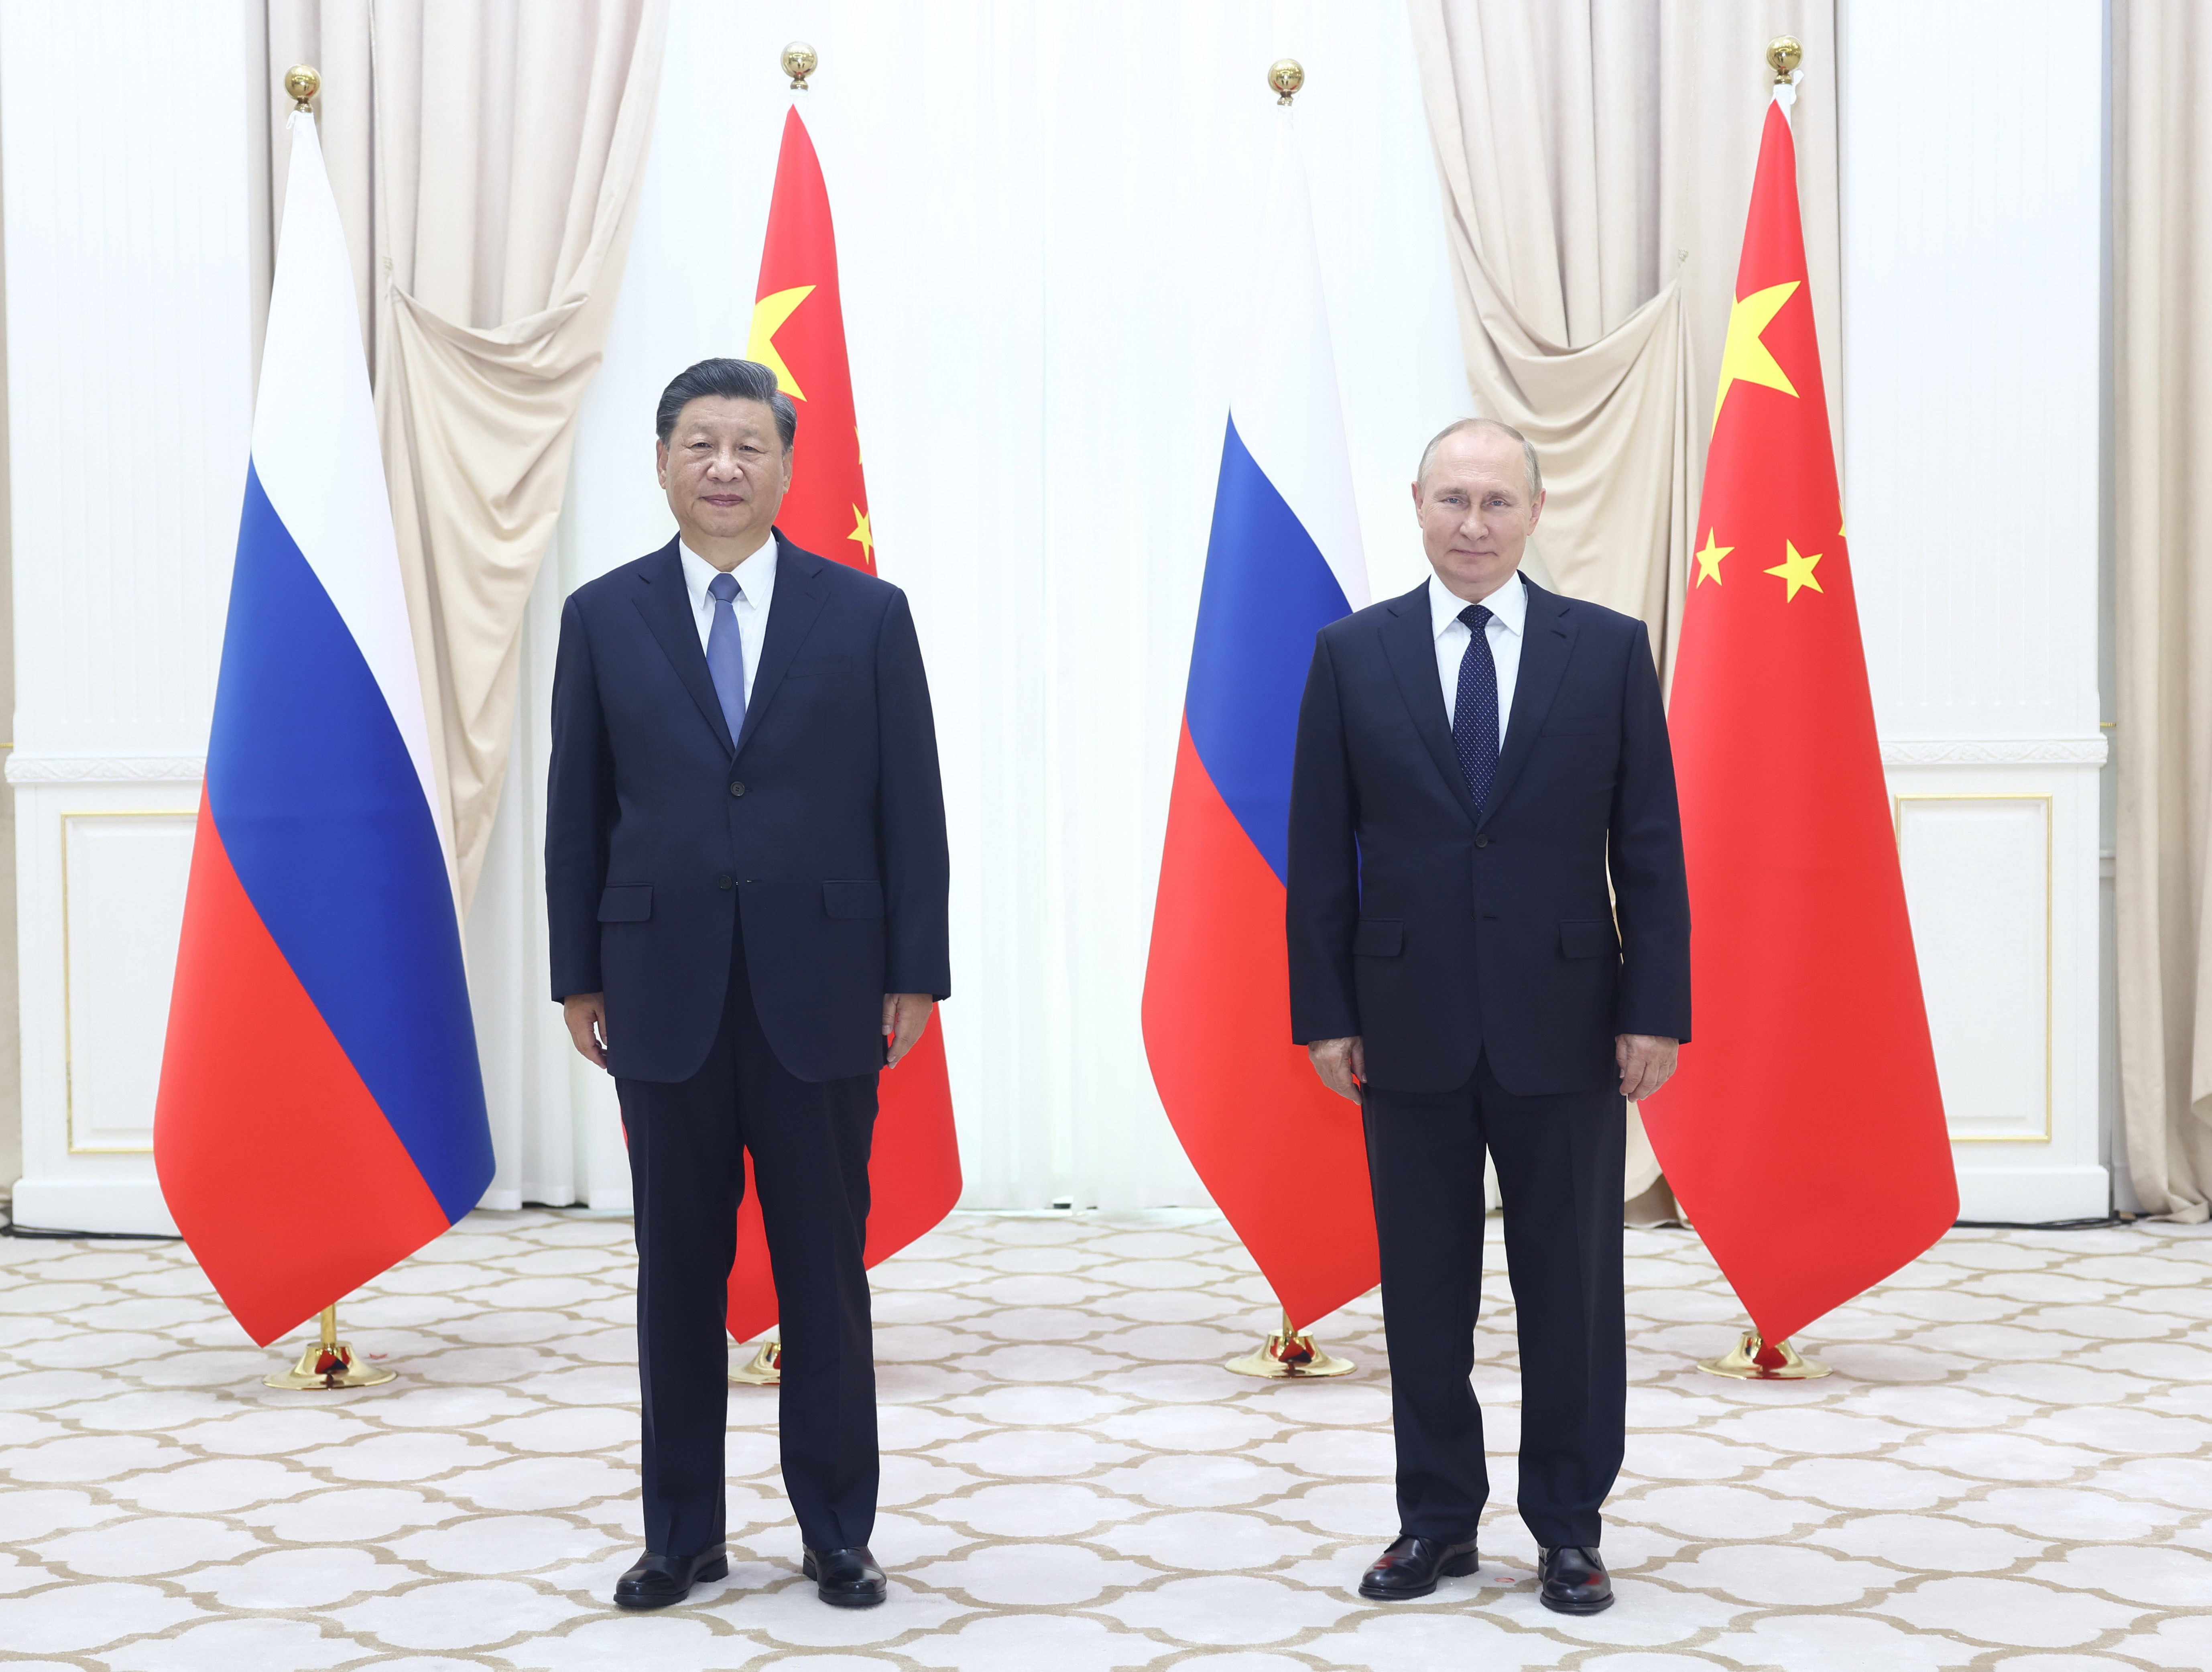 Xi Jinping and Vladimir Putin stand in front of their countries’ flags. 